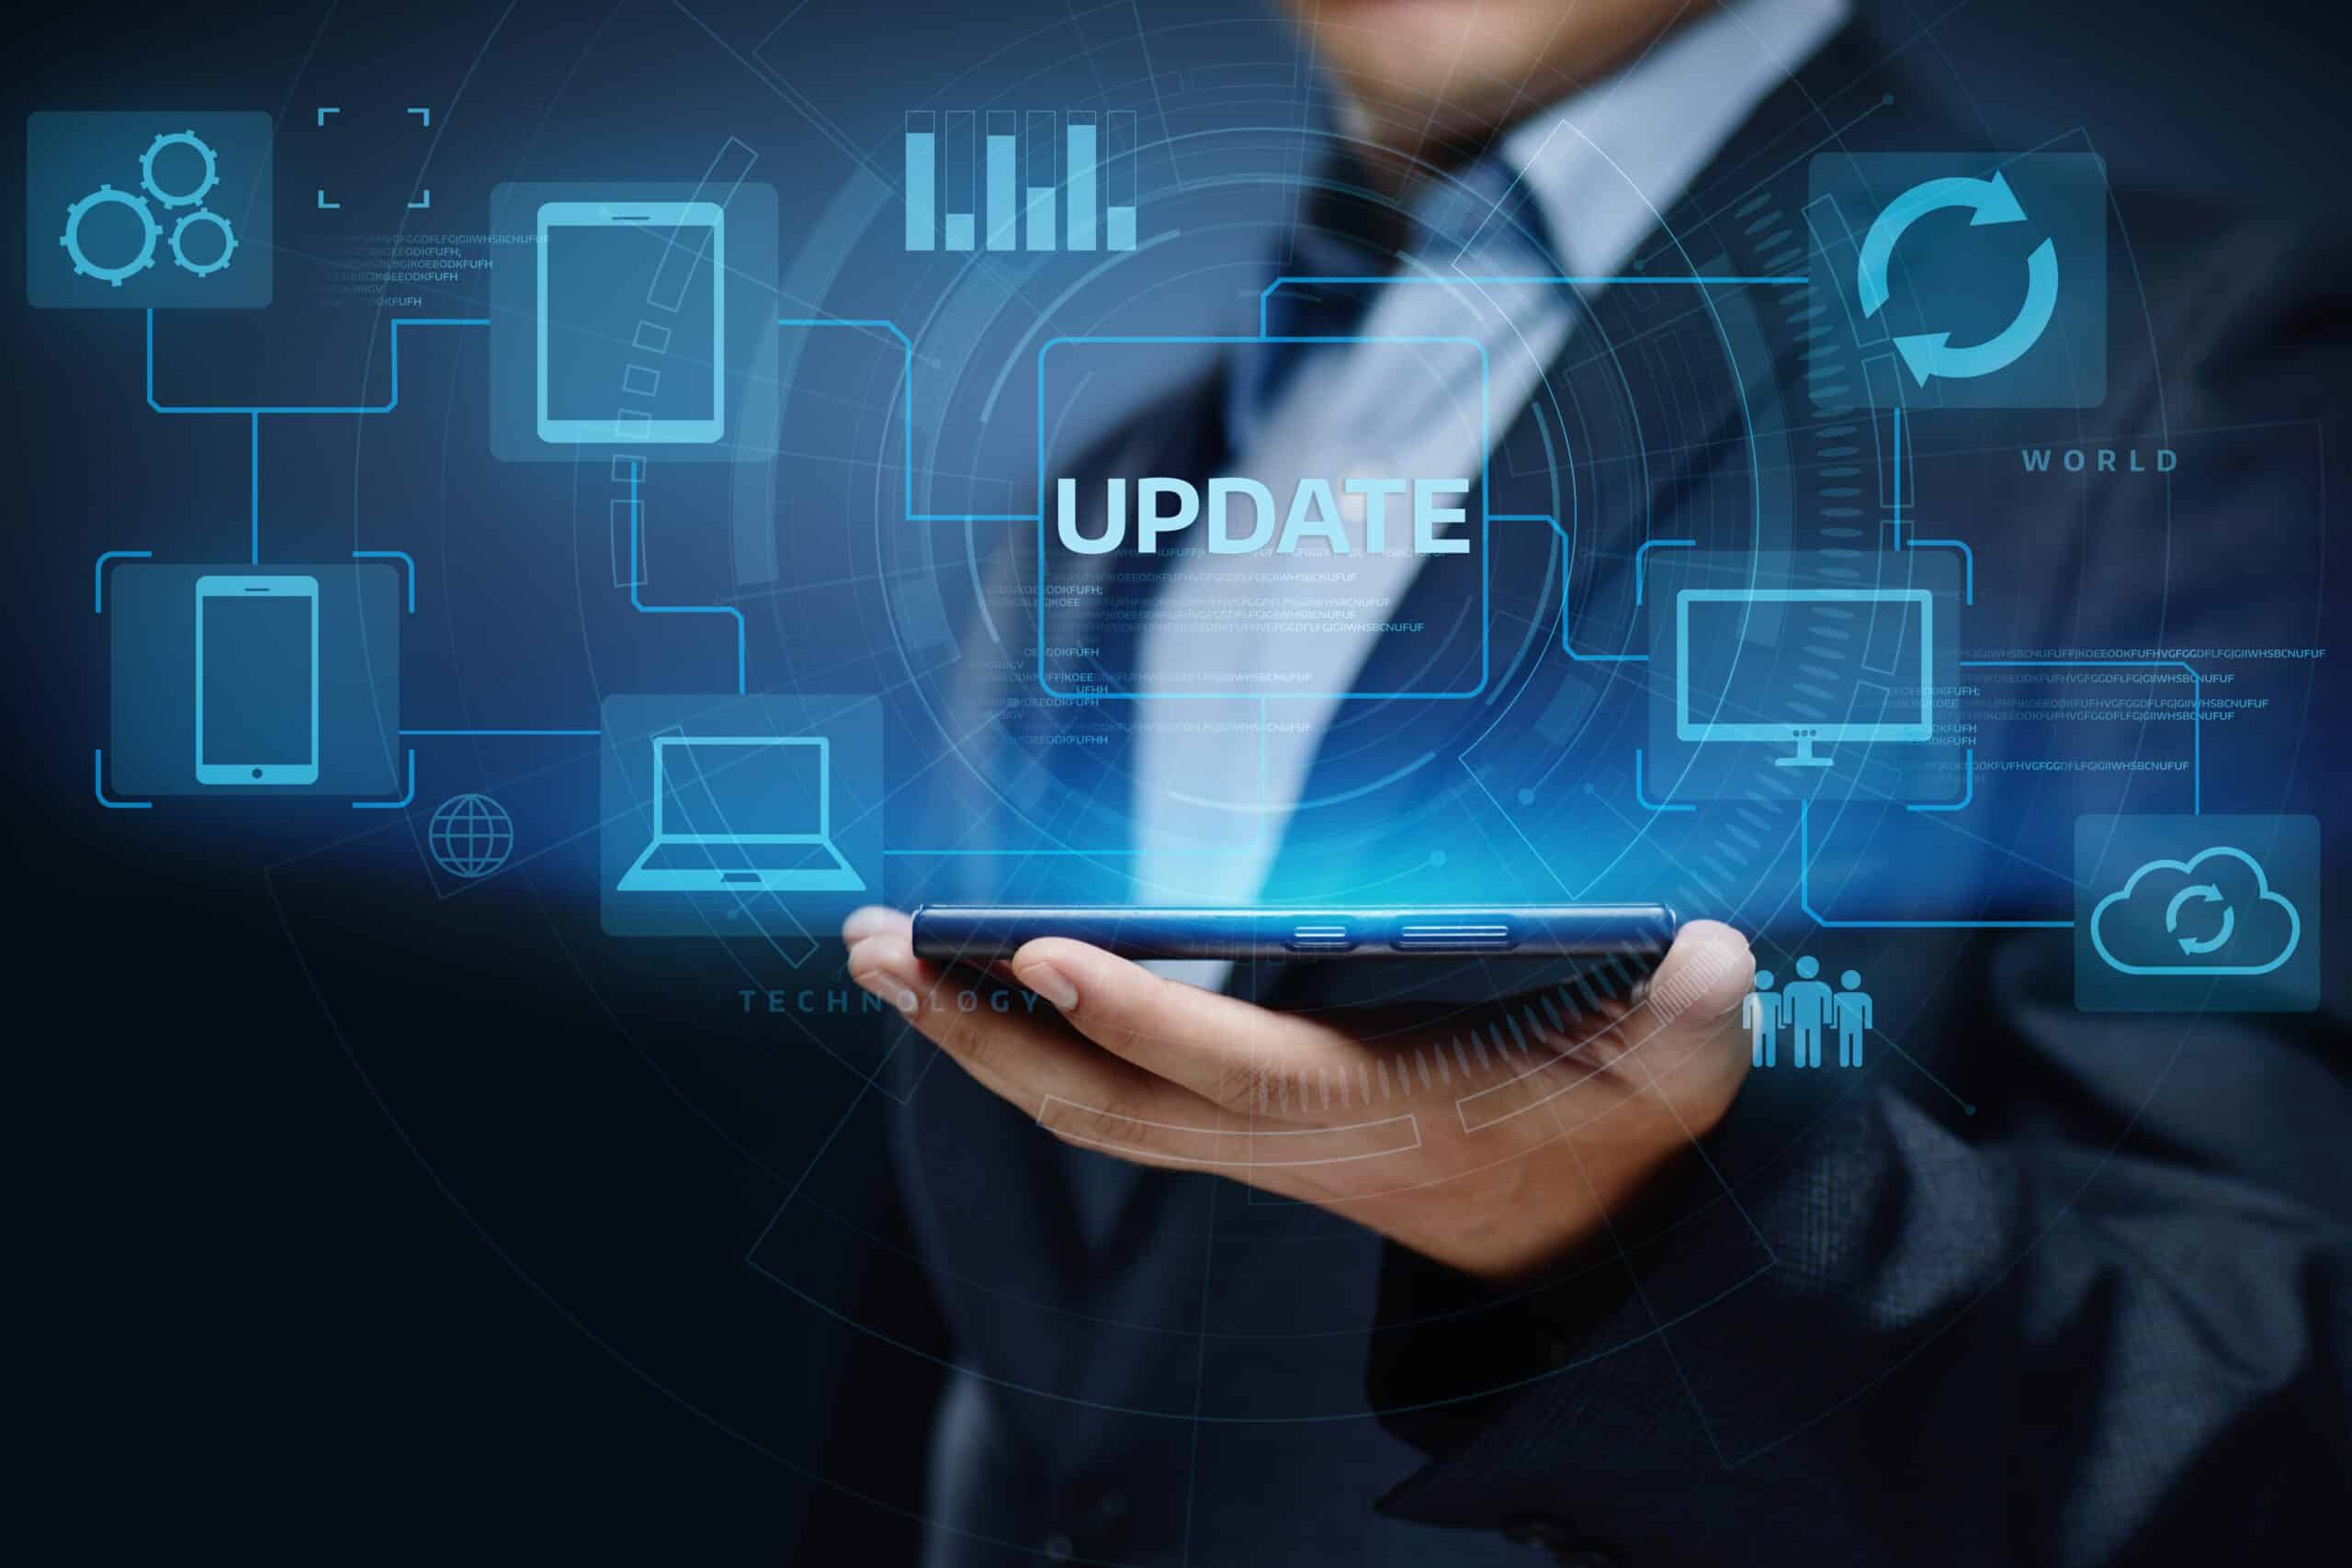 Man in business suit with conceptual graphic of update software around laptops and devices.